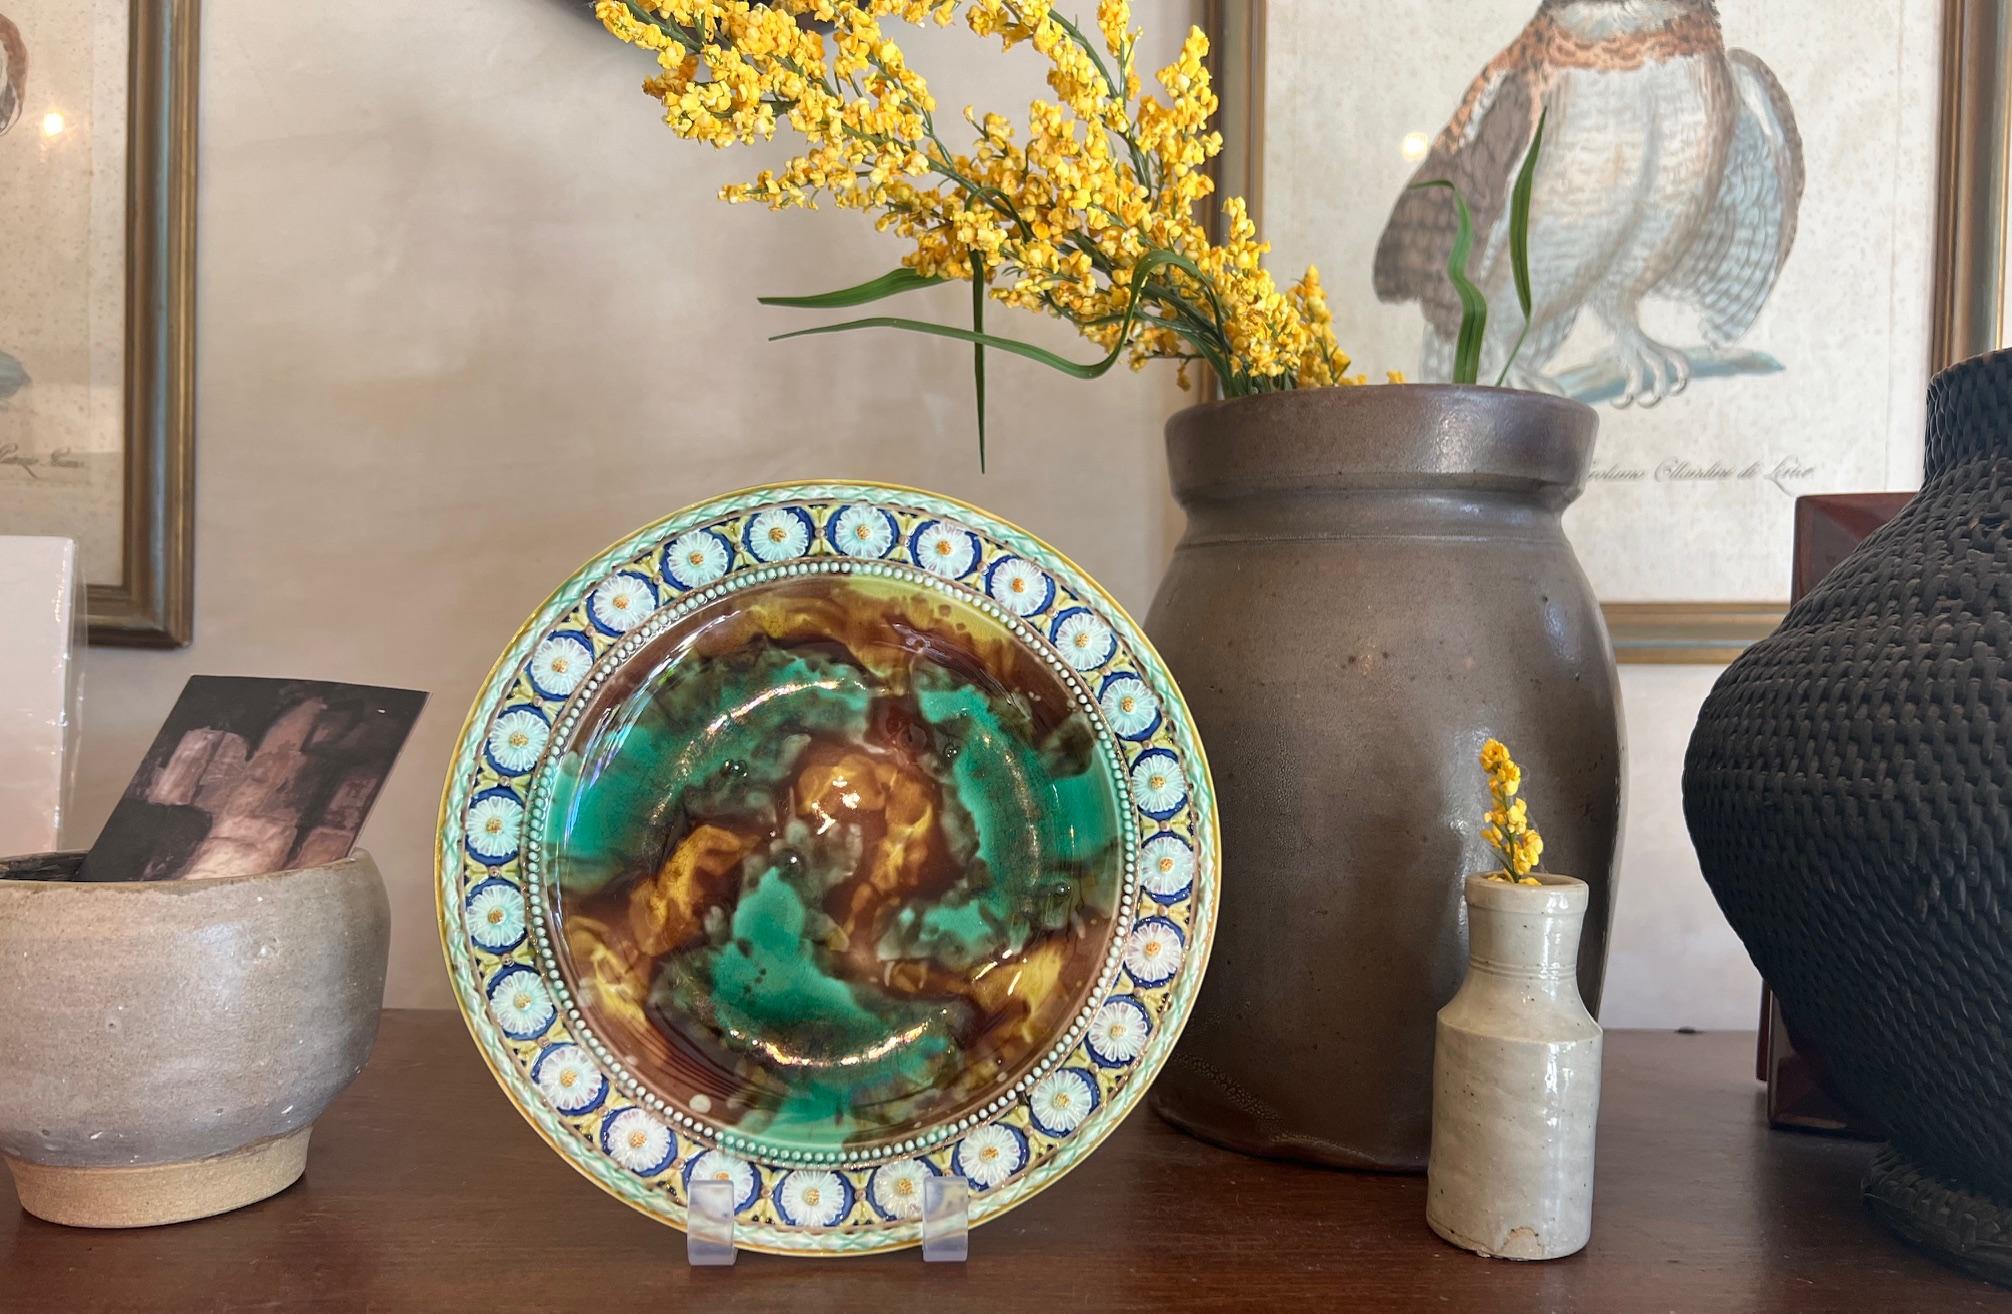 Set of two antique majolica plates by Wedgwood in England in 1871 and 1872. The ceramic plates have a molted tortoise shell design in the center surrounded by a ring of daisies, separated by a beaded border. They are both hand painted so not exactly